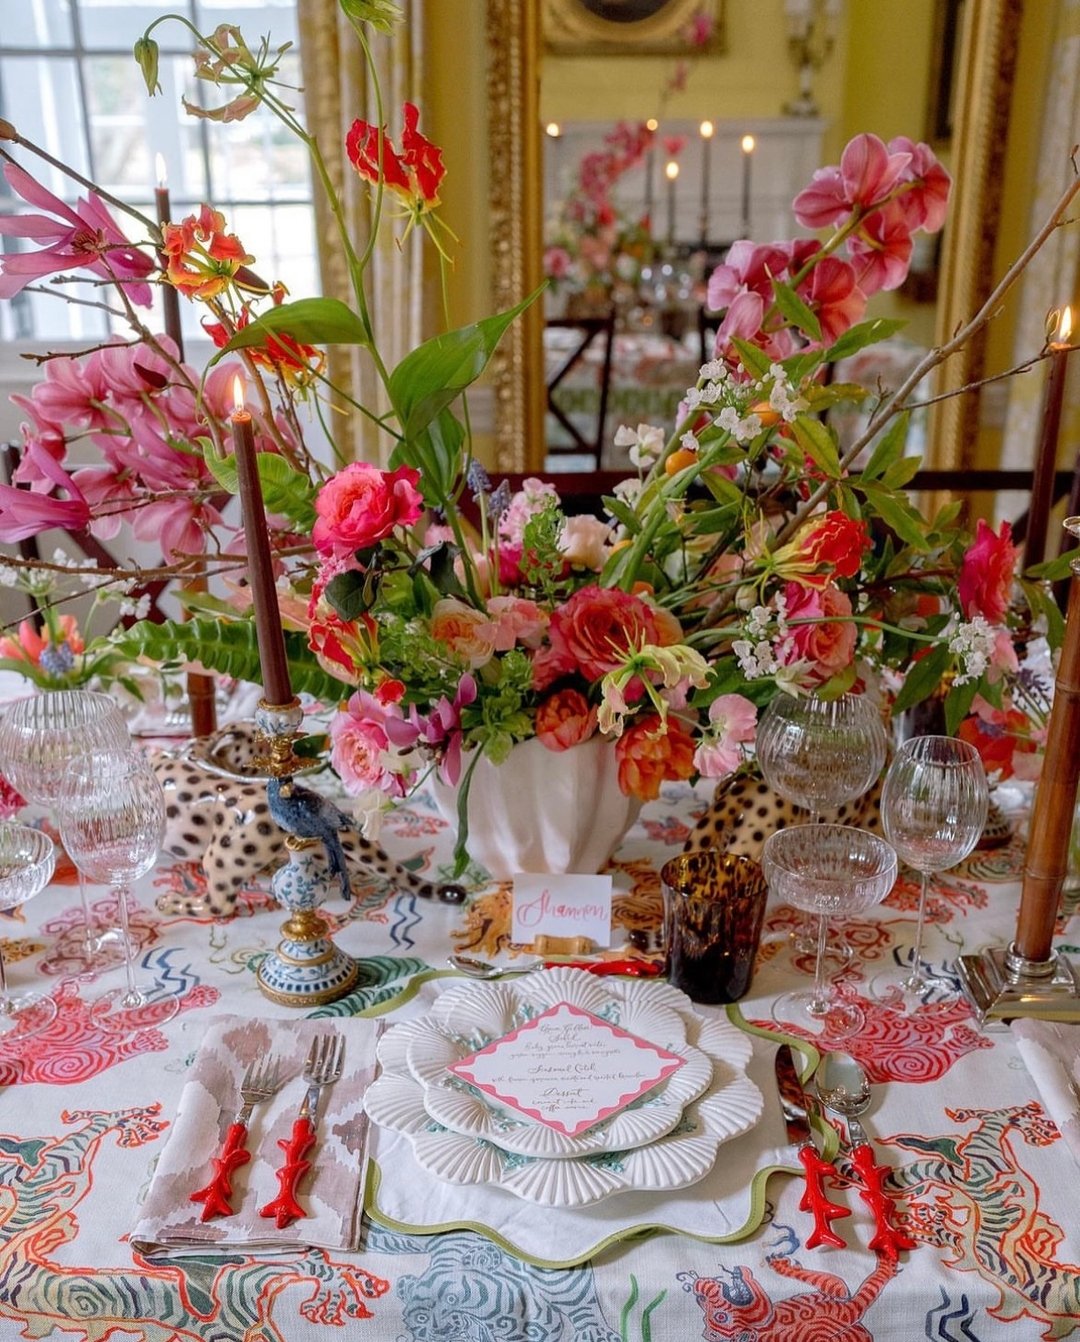 If this doesn't radiate a palette of happiness, we don't know what does! 💚 🐆 🌸 🪸 🌈 🌿 💗
.
.
.
#colorful #radiate #happiness #tablescape #styledshoot #customtablecloth #junglevibes #jungalow #pinkfloral #placesetting #photoshoot #styled #bolddes